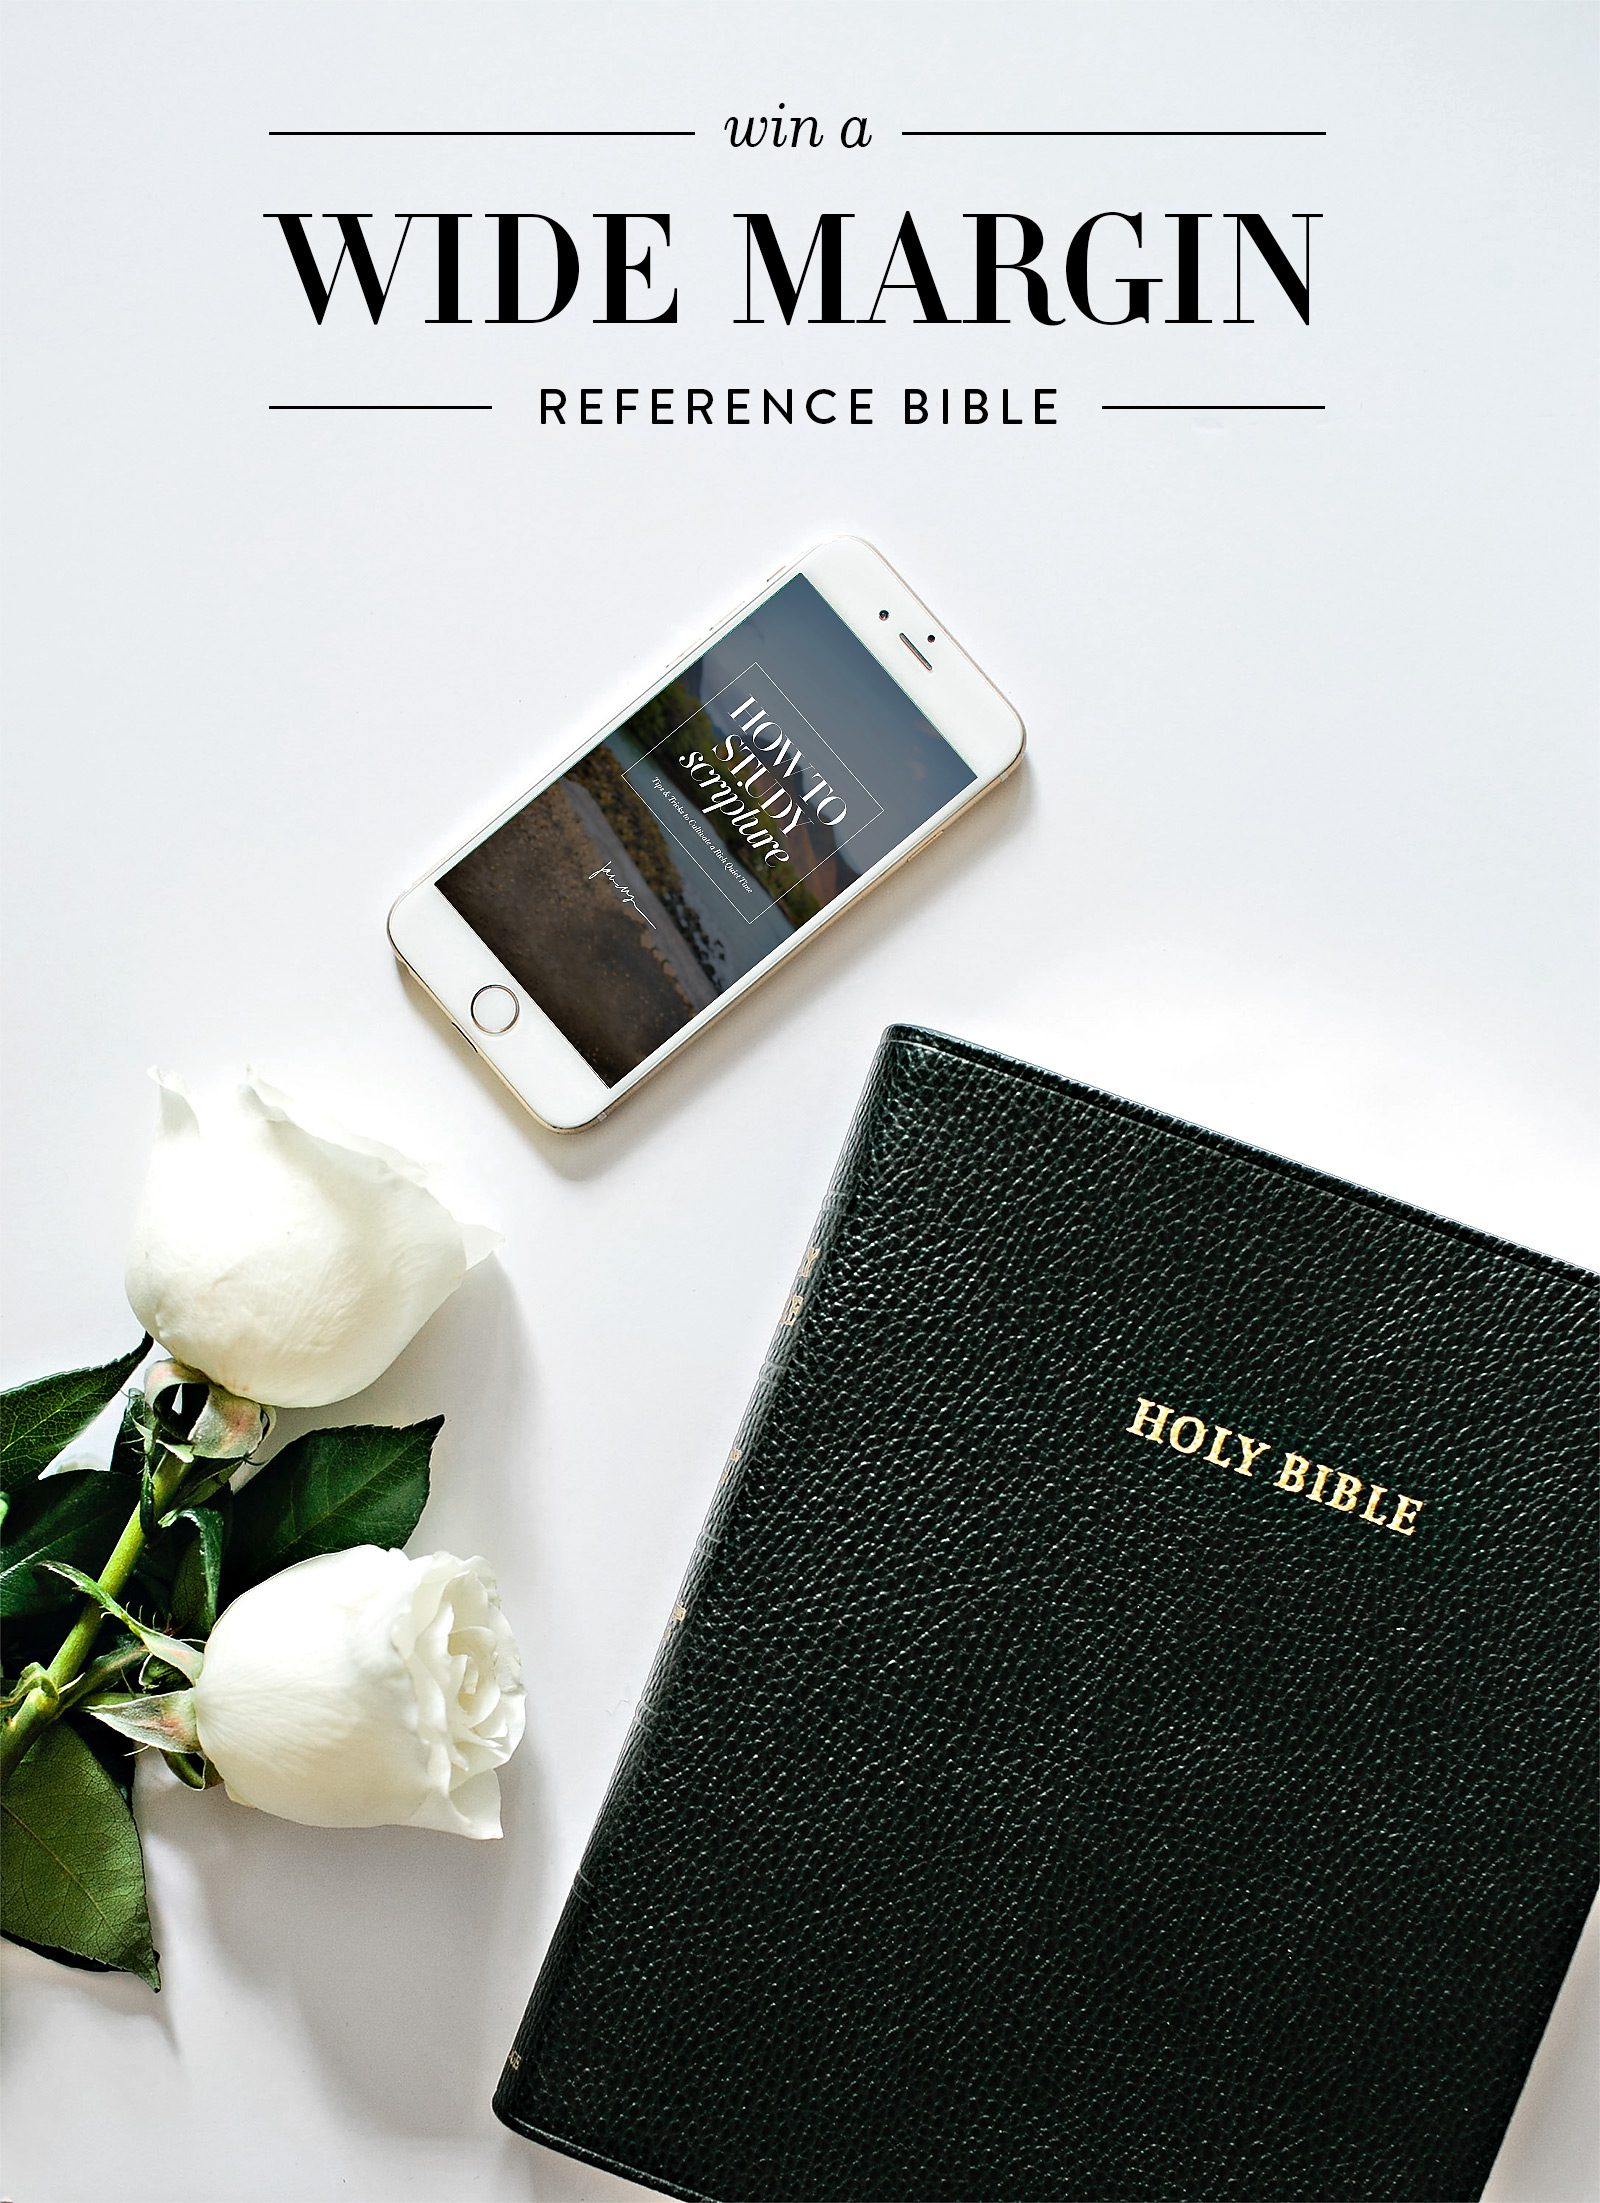 Wide Margin Reference Bible Giveaway